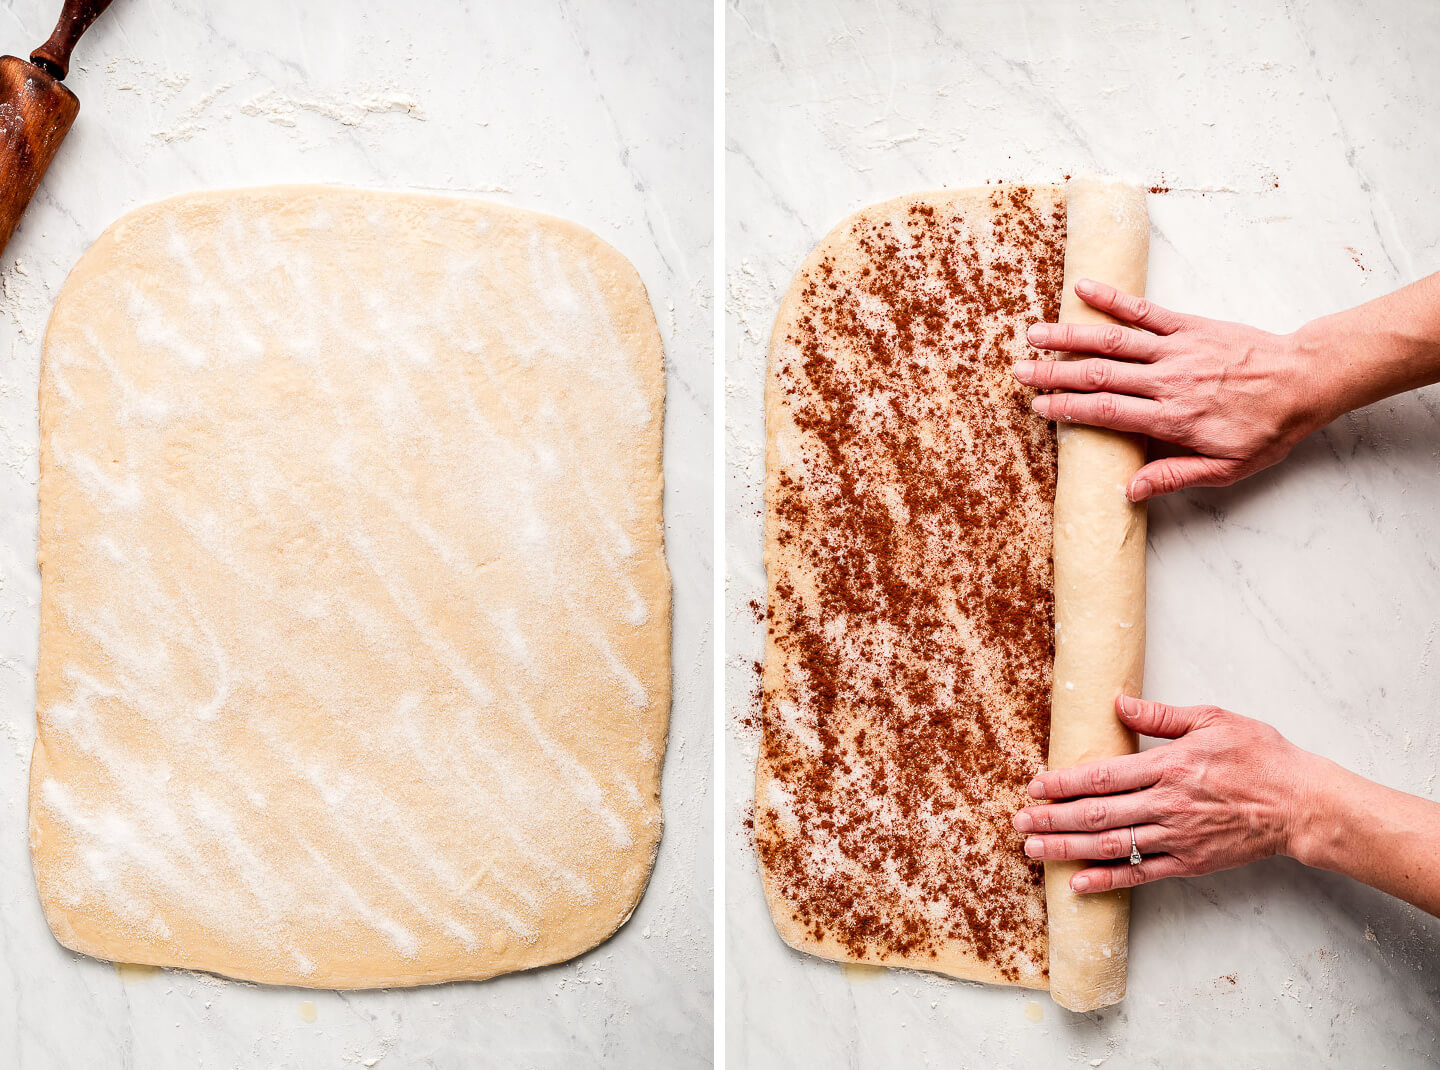 Diptych- Rolled out dough with sugar sprinkled over the top; Cinnamon added and two hands rolling the dough up into a log.